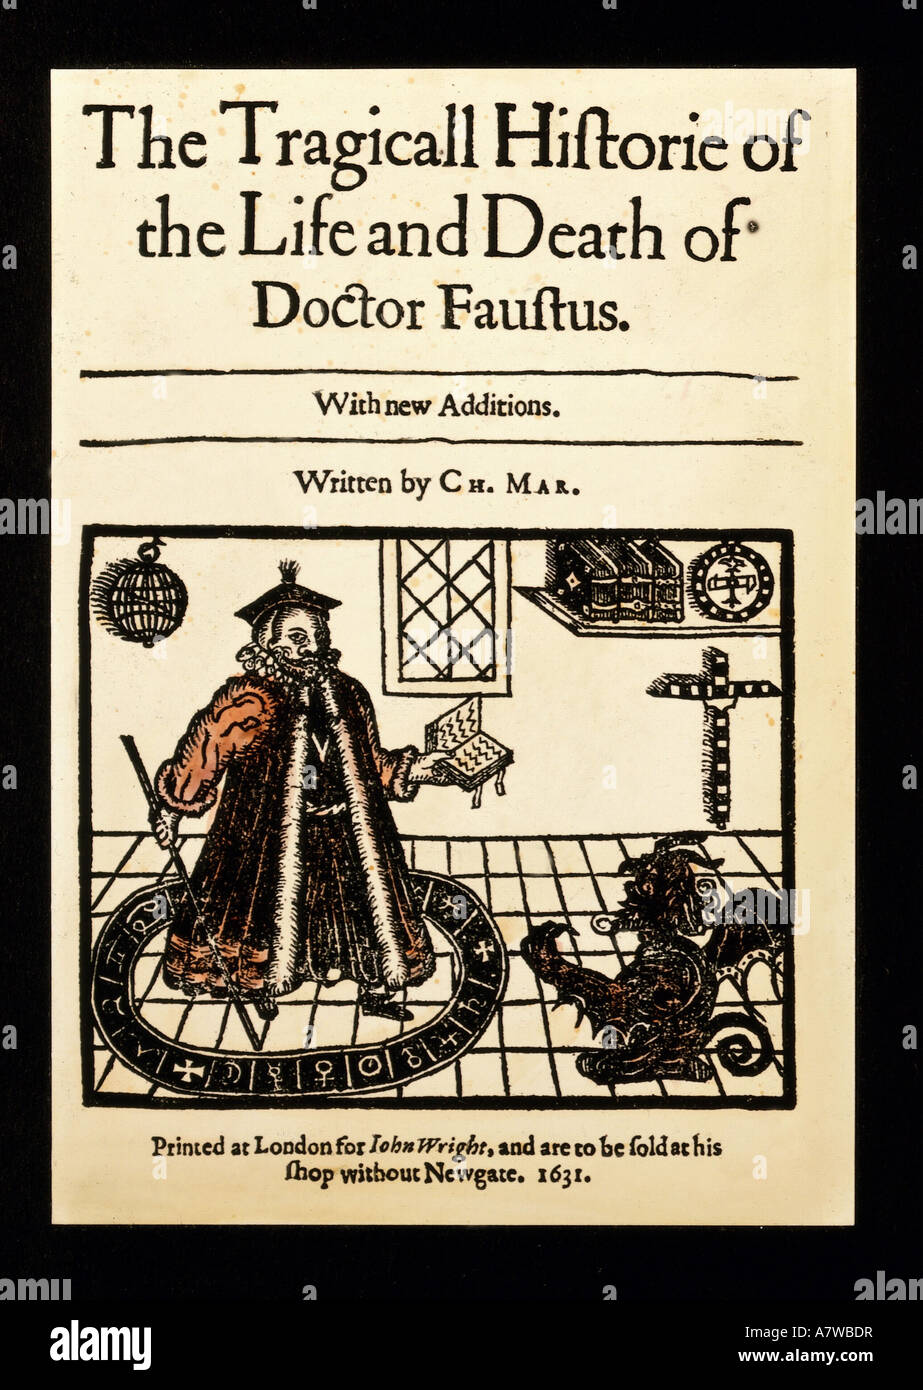 Marlowe, Christopher, 6.2.1564 - 30.5.1593, englischer Autor/Schriftsteller, "The Tragical History of the Life and Tod of Doctor Faustus", London, 1636, Farbholzschnitt, Buch, Cover, Stockfoto